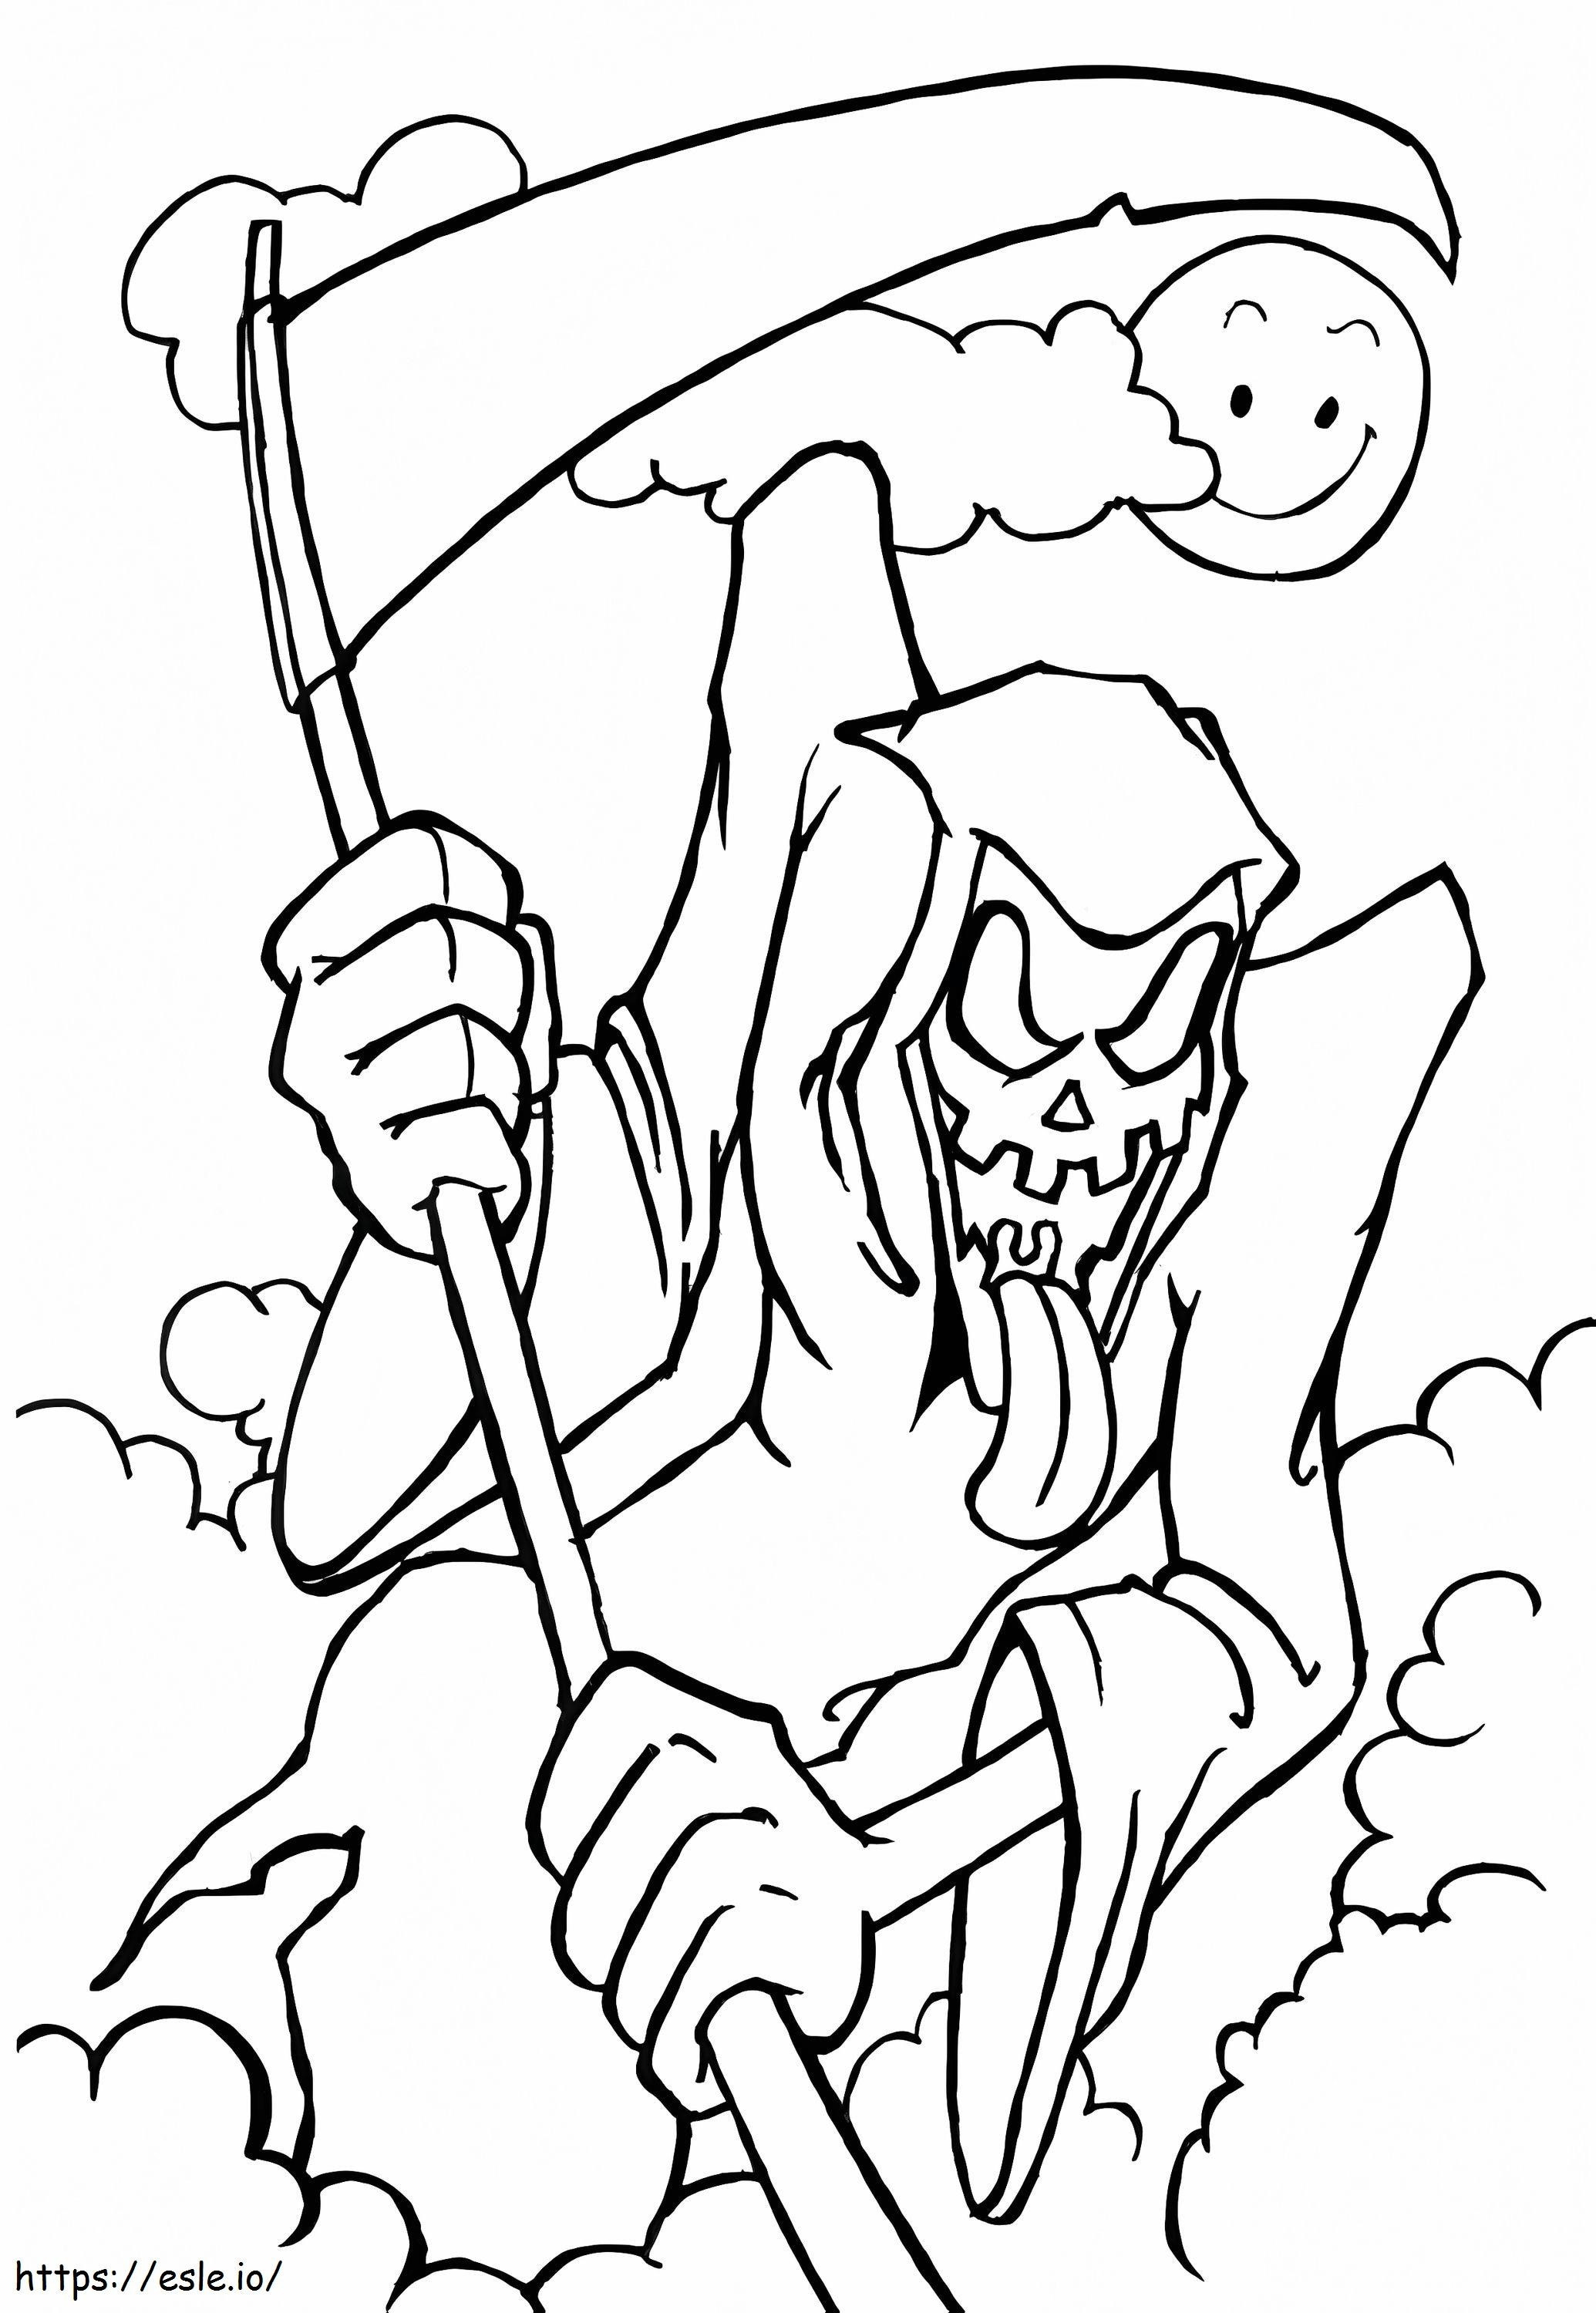 Plowshare With Scythe coloring page